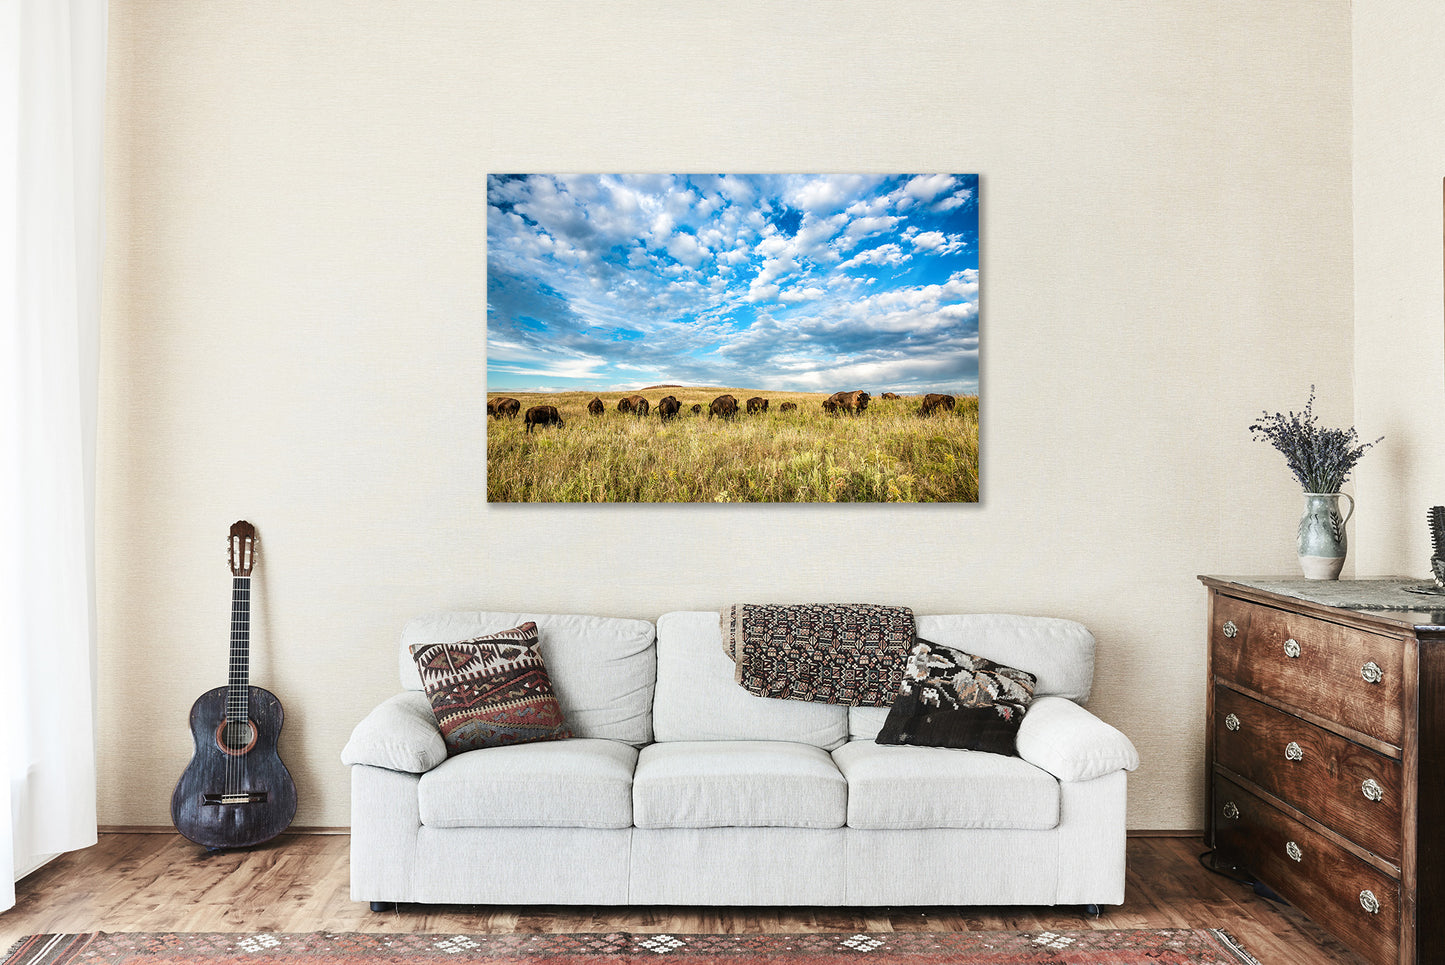 Buffalo Canvas | Bison Herd Gallery Wrap | Oklahoma Photography | Great Plains Wall Art | Western Decor | Ready to Hang